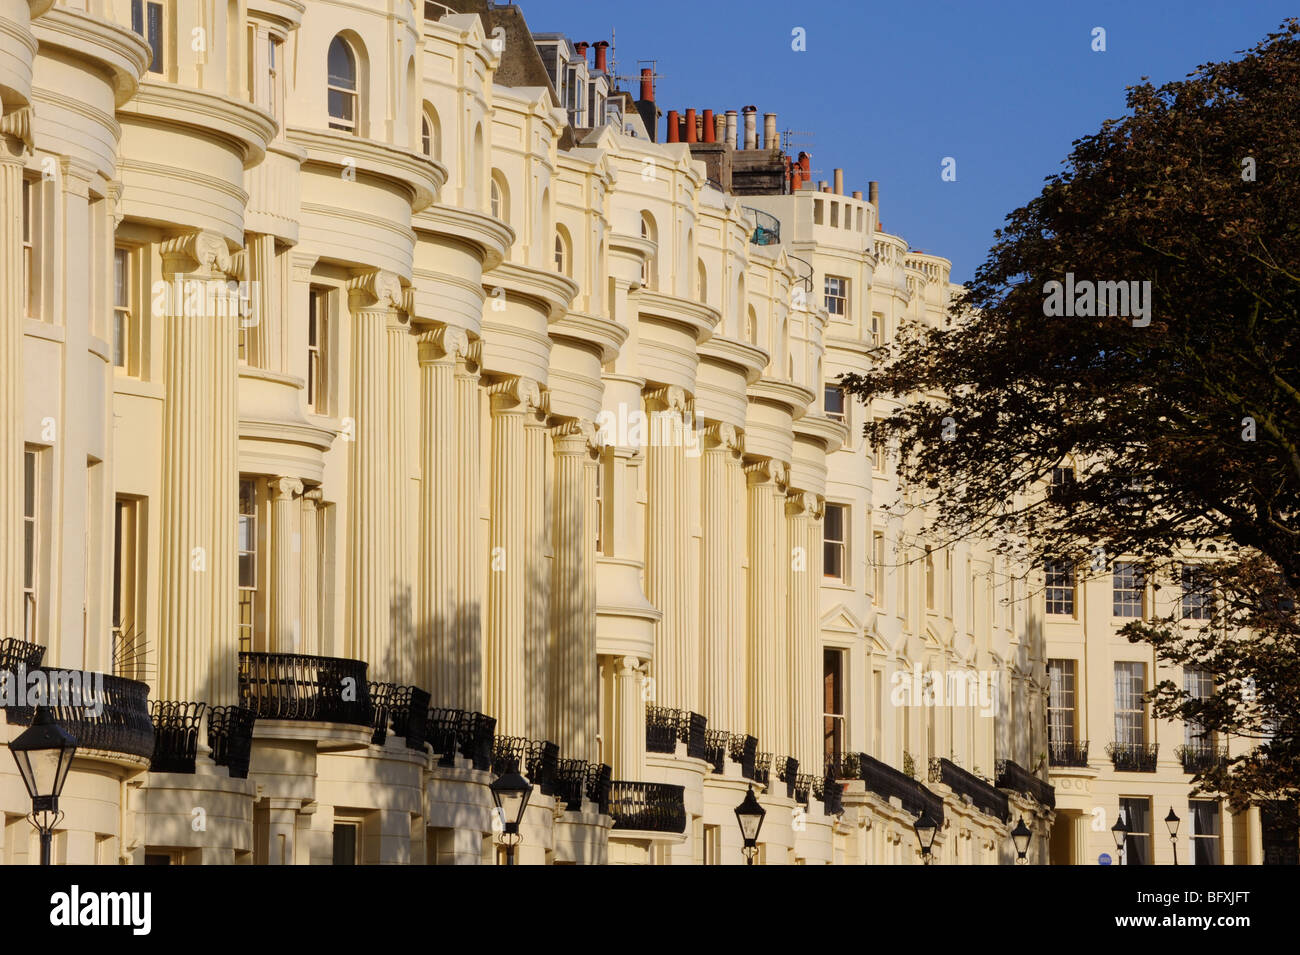 The distinctive Regency architecture of Brunswick Square in Hove on the borders of Brighton, Sussex Coast, UK. Pic Jim Holden Stock Photo